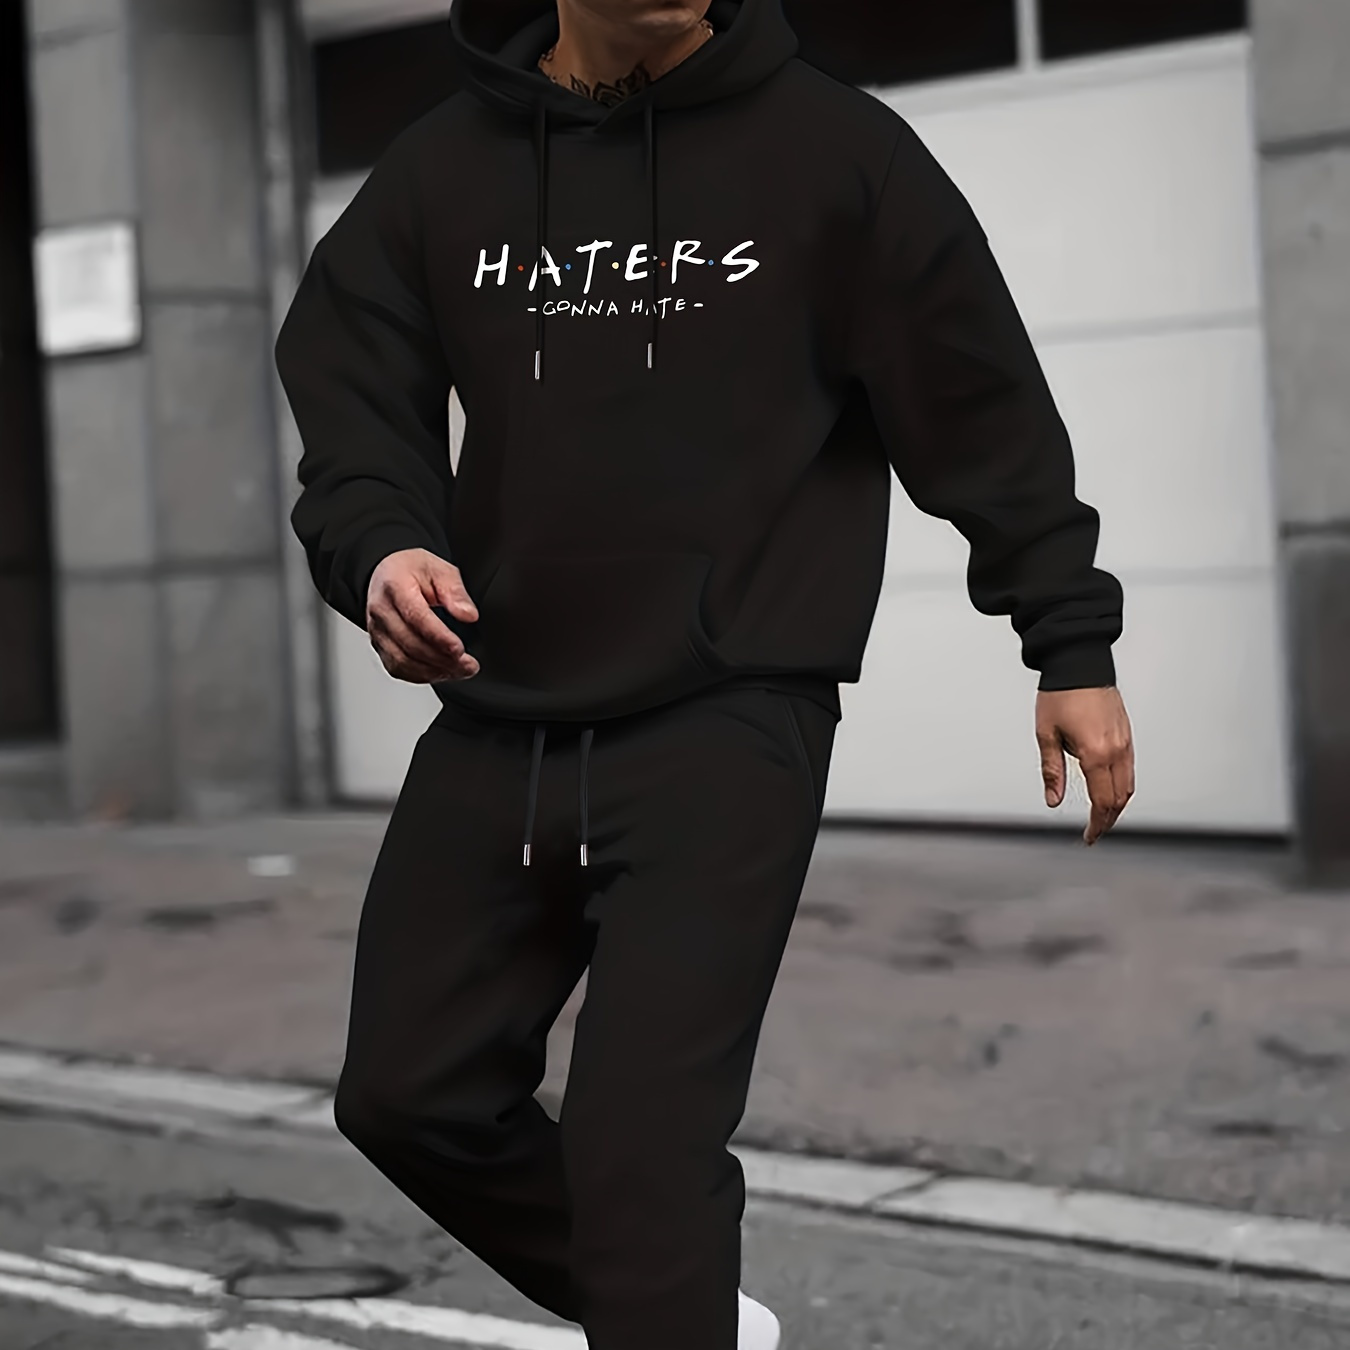 

Men's Outfit Set, Haters Pattern Fleece Warm Long Sleeve Hoodie And Drawstring Sweatpants, 2-piece Set For Spring Summer Outdoor Jogging Gym Workout